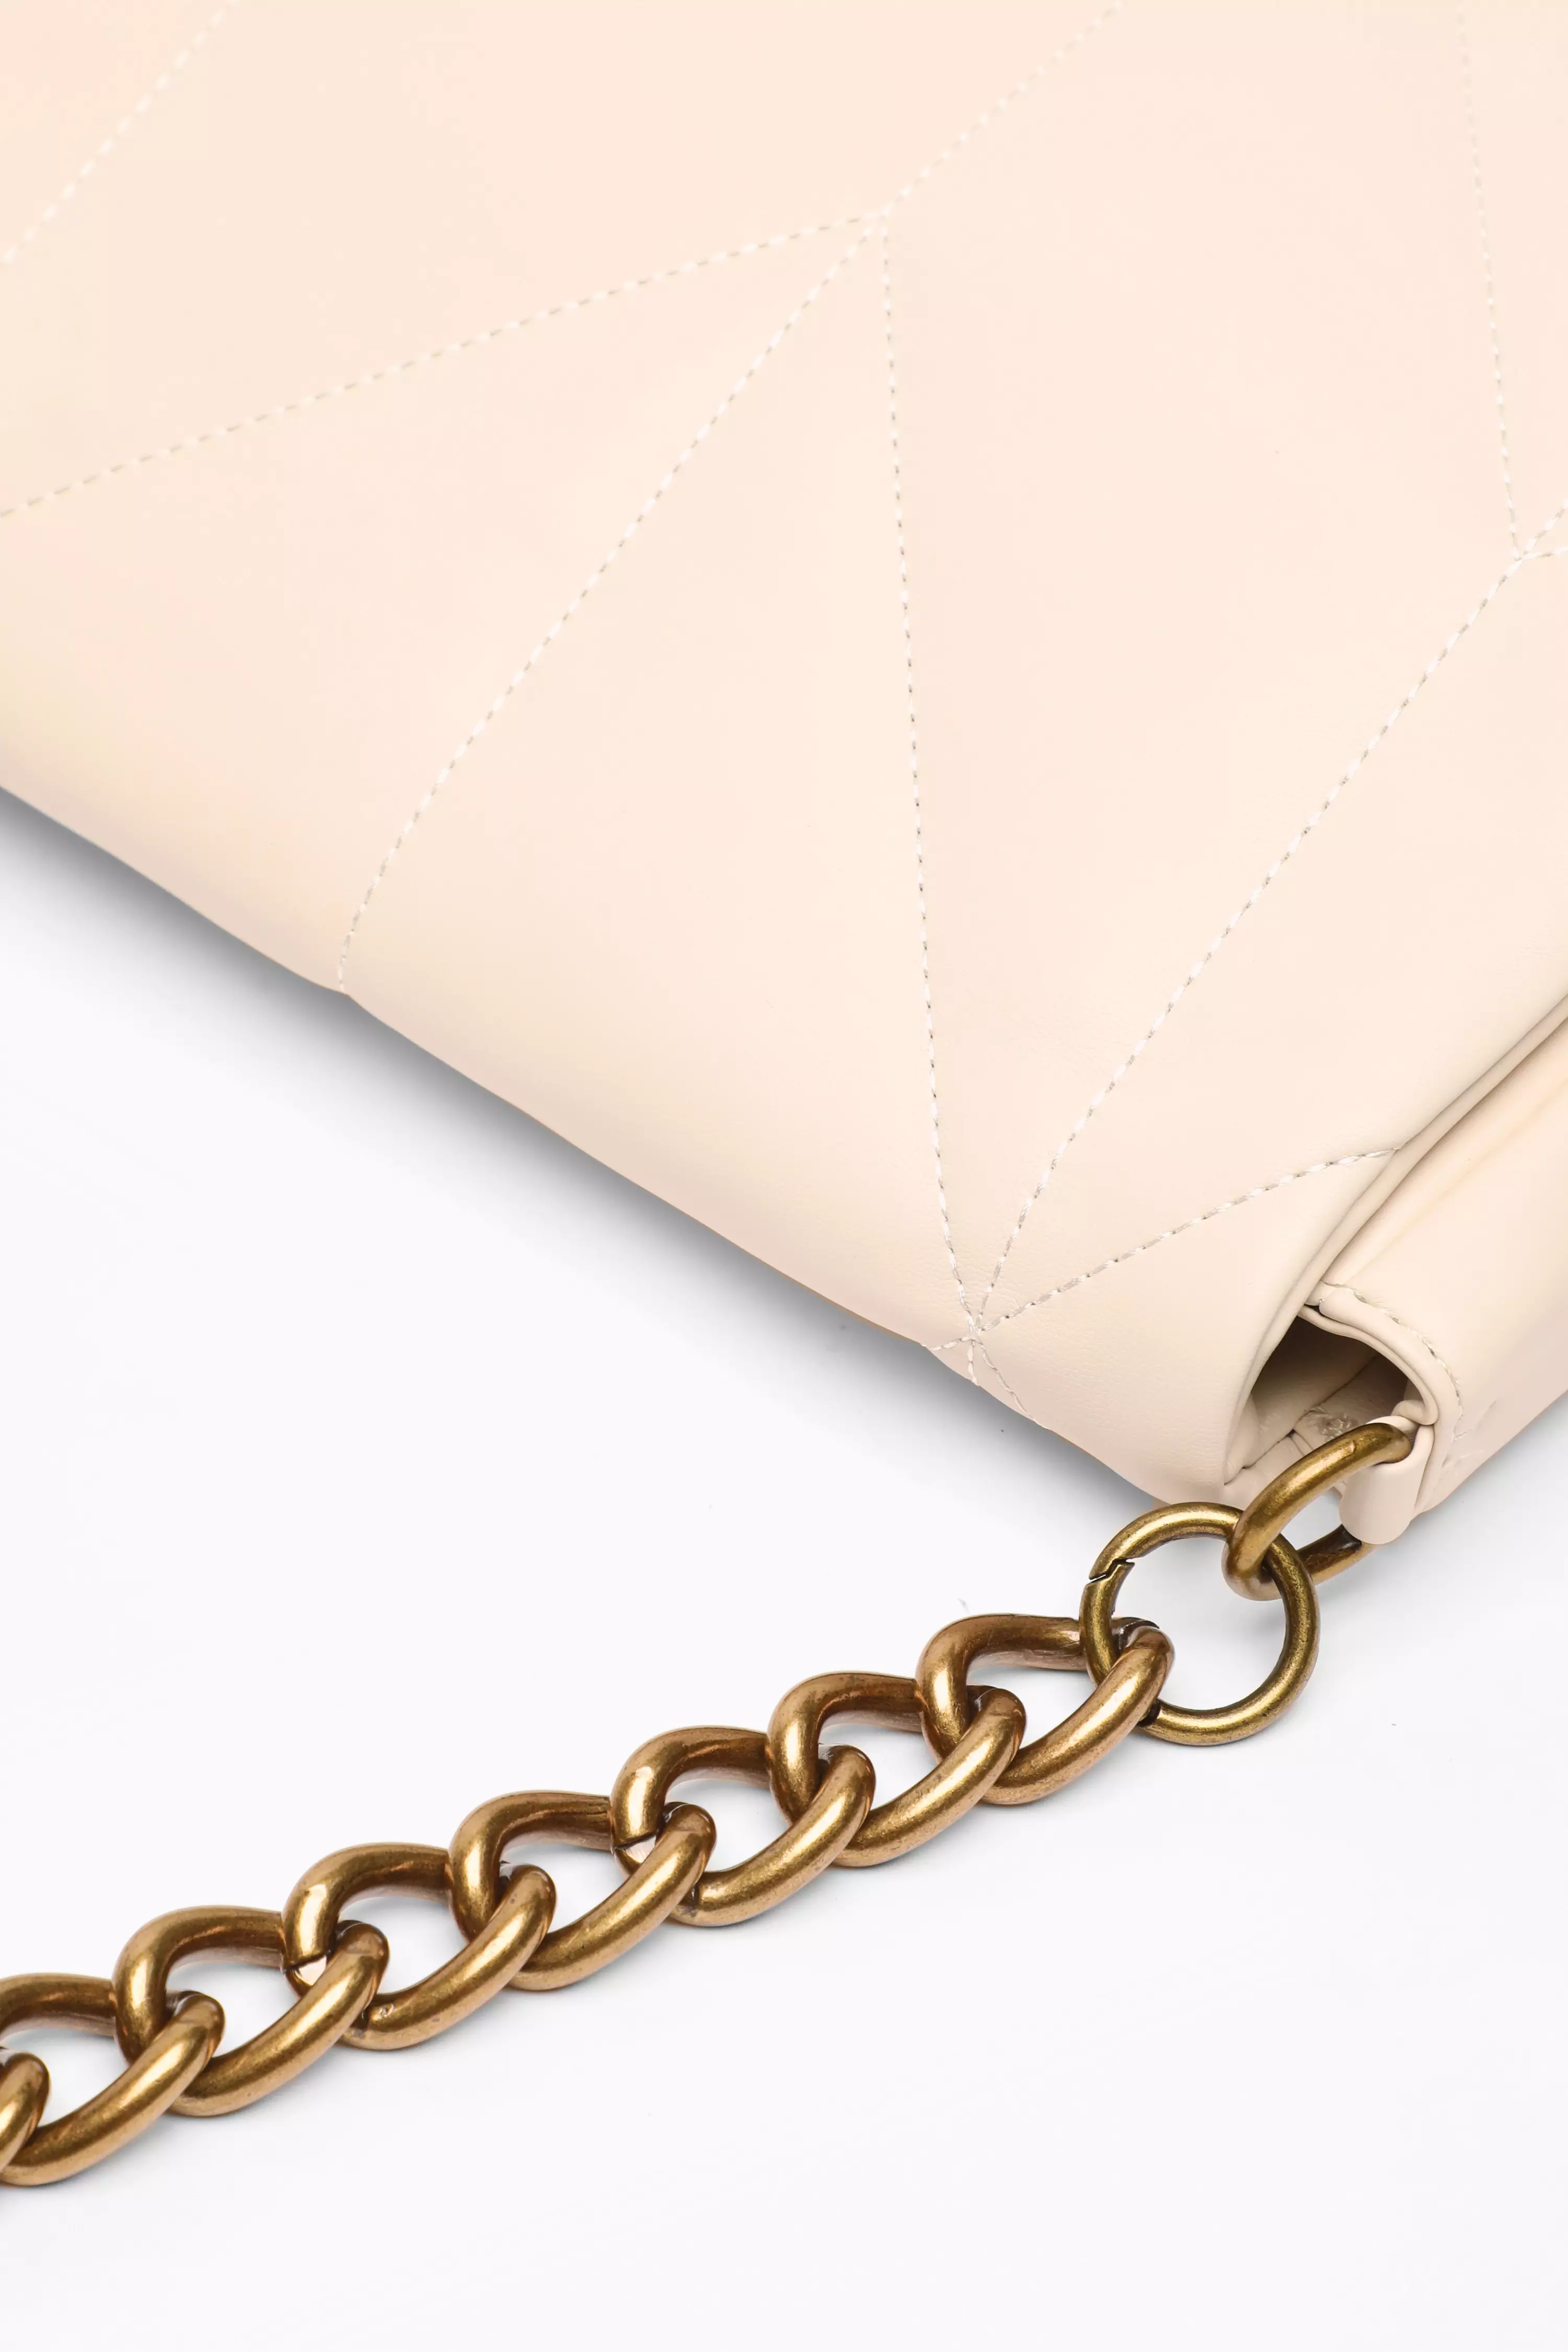 Cream Faux Leather Quilted Shoulder Bag